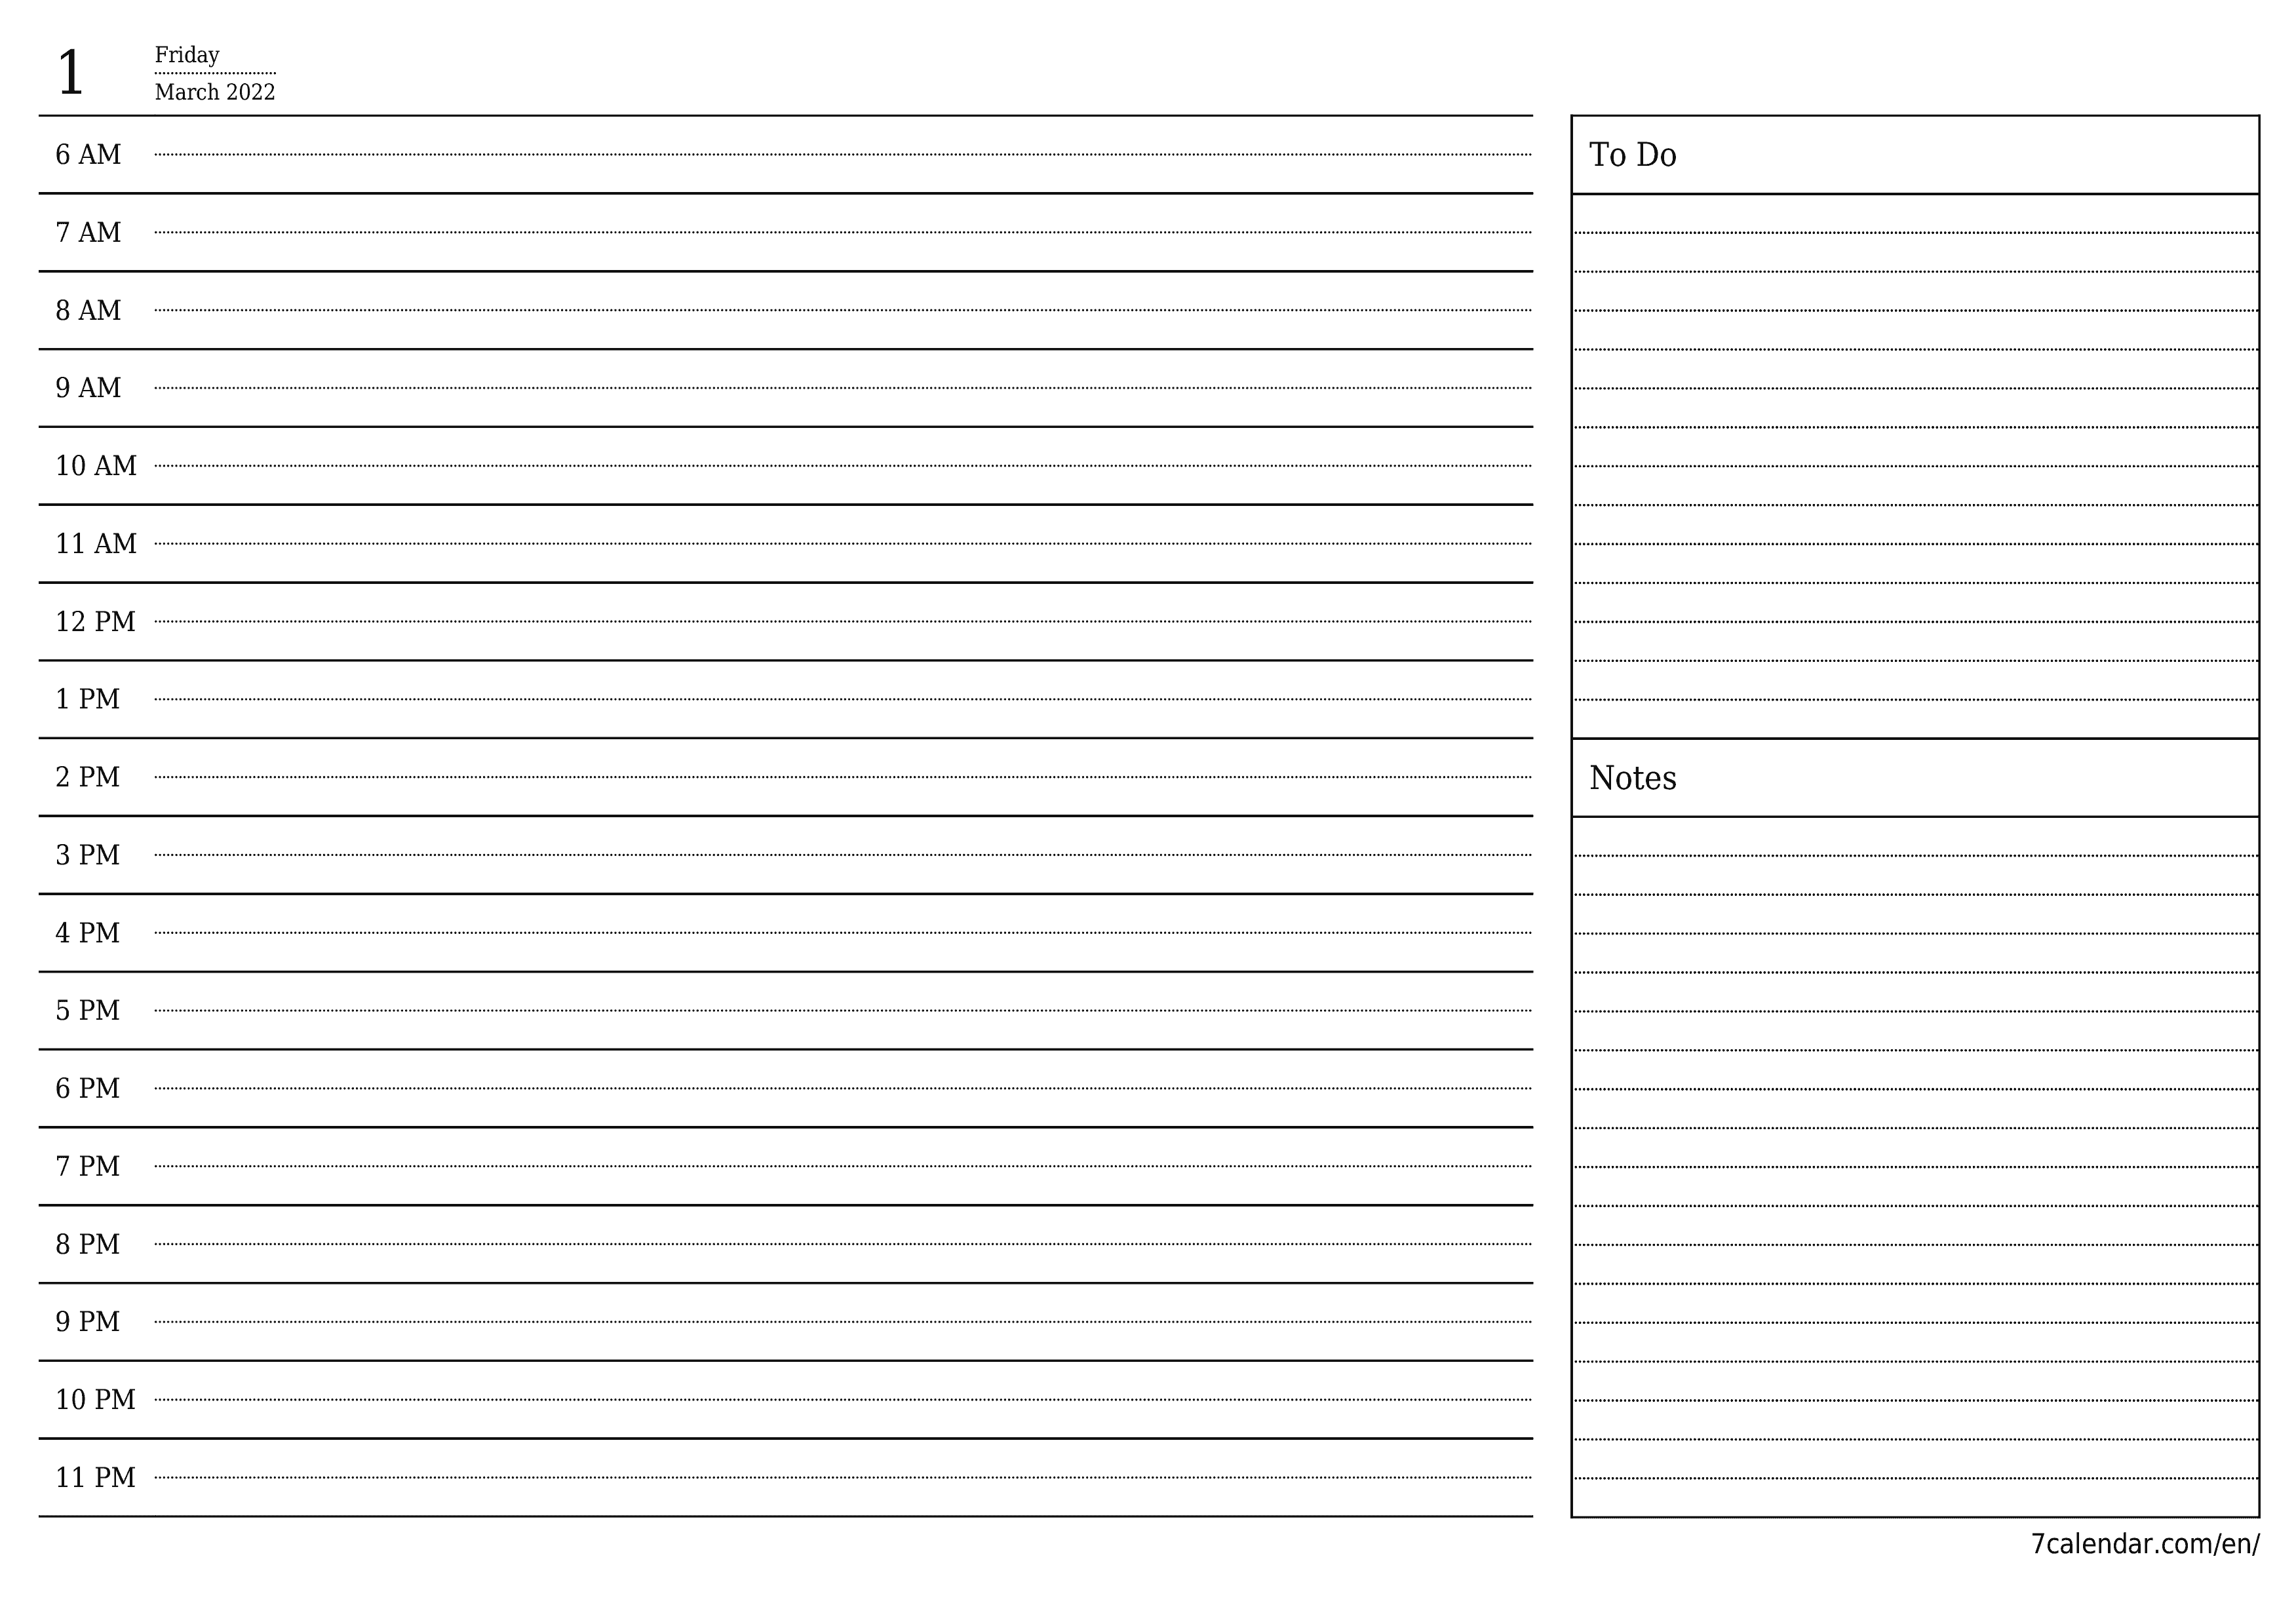 Blank daily calendar planner for day March 2022 with notes, save and print to PDF PNG English - 7calendar.com